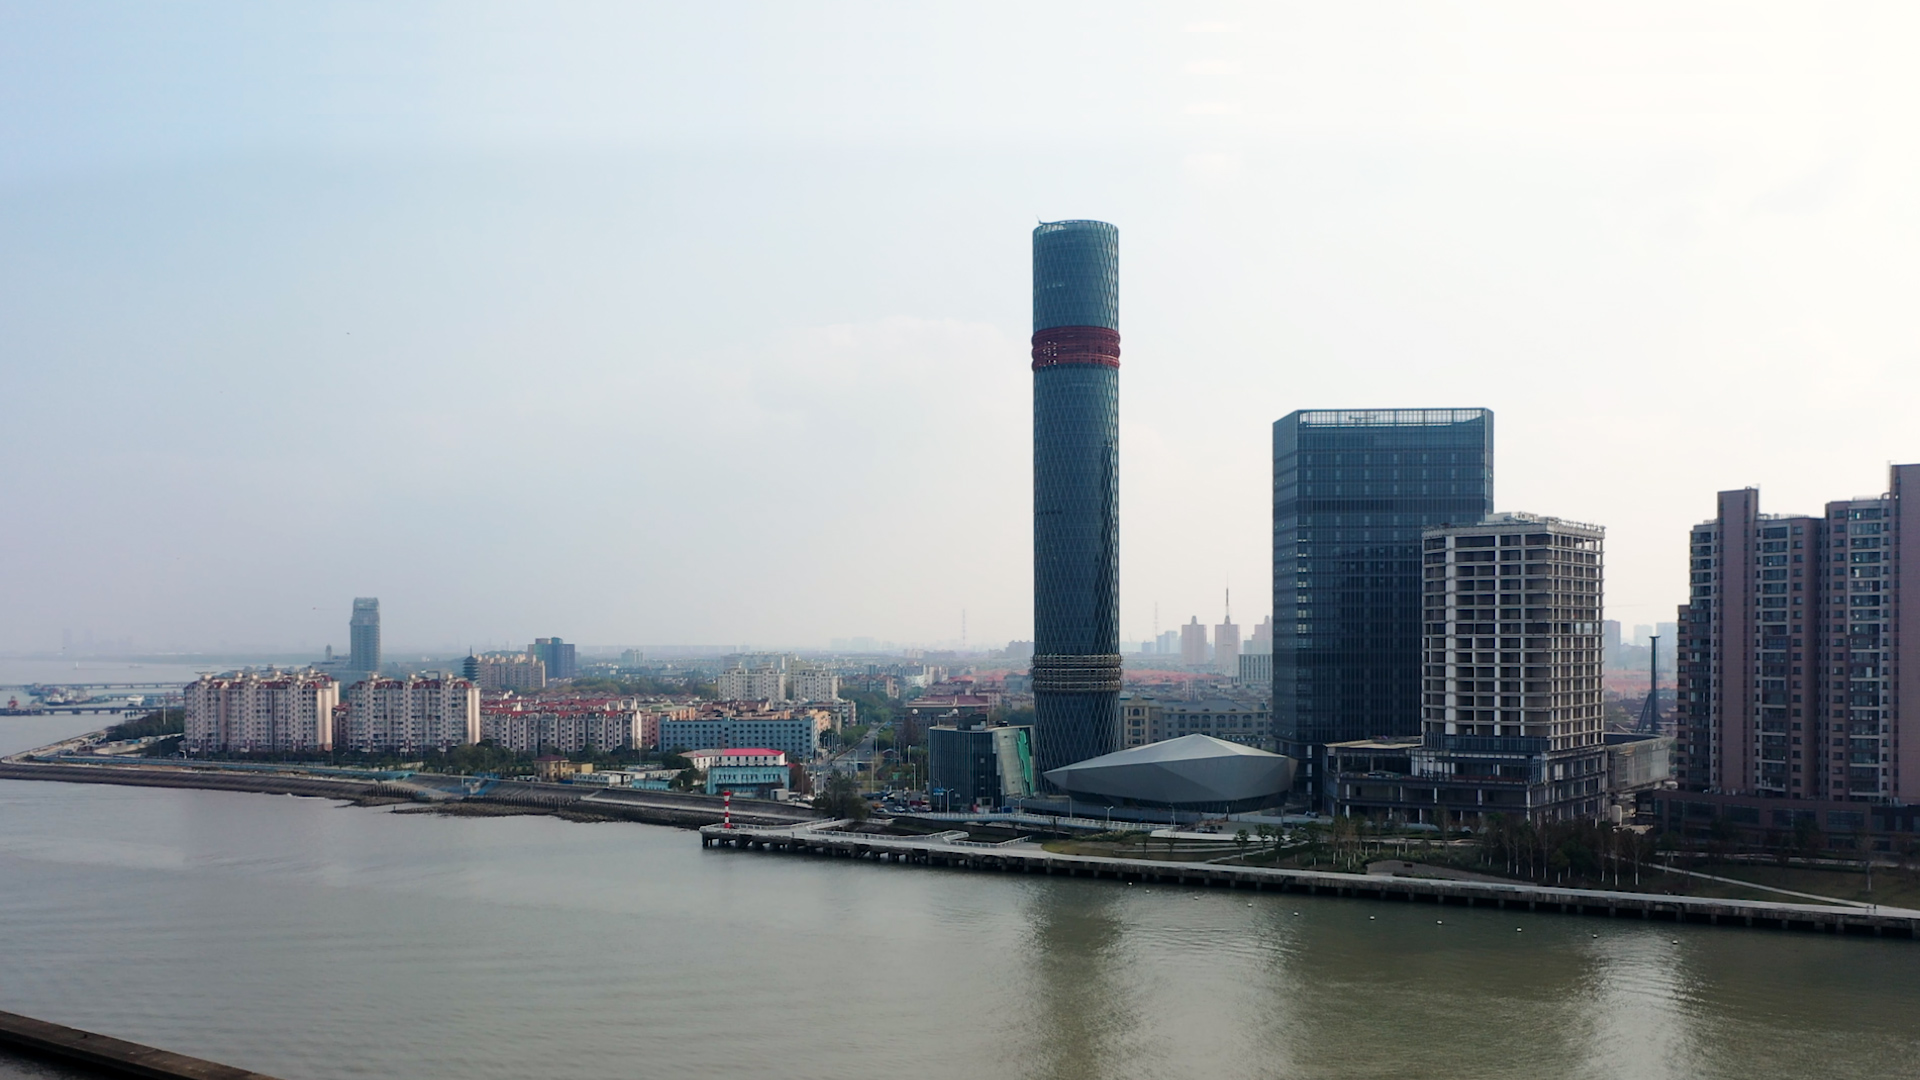 Mixed use campus seen from the water. Tall highrise tower in the middle of the frame with blue glass facade and red design band in Baoshan China